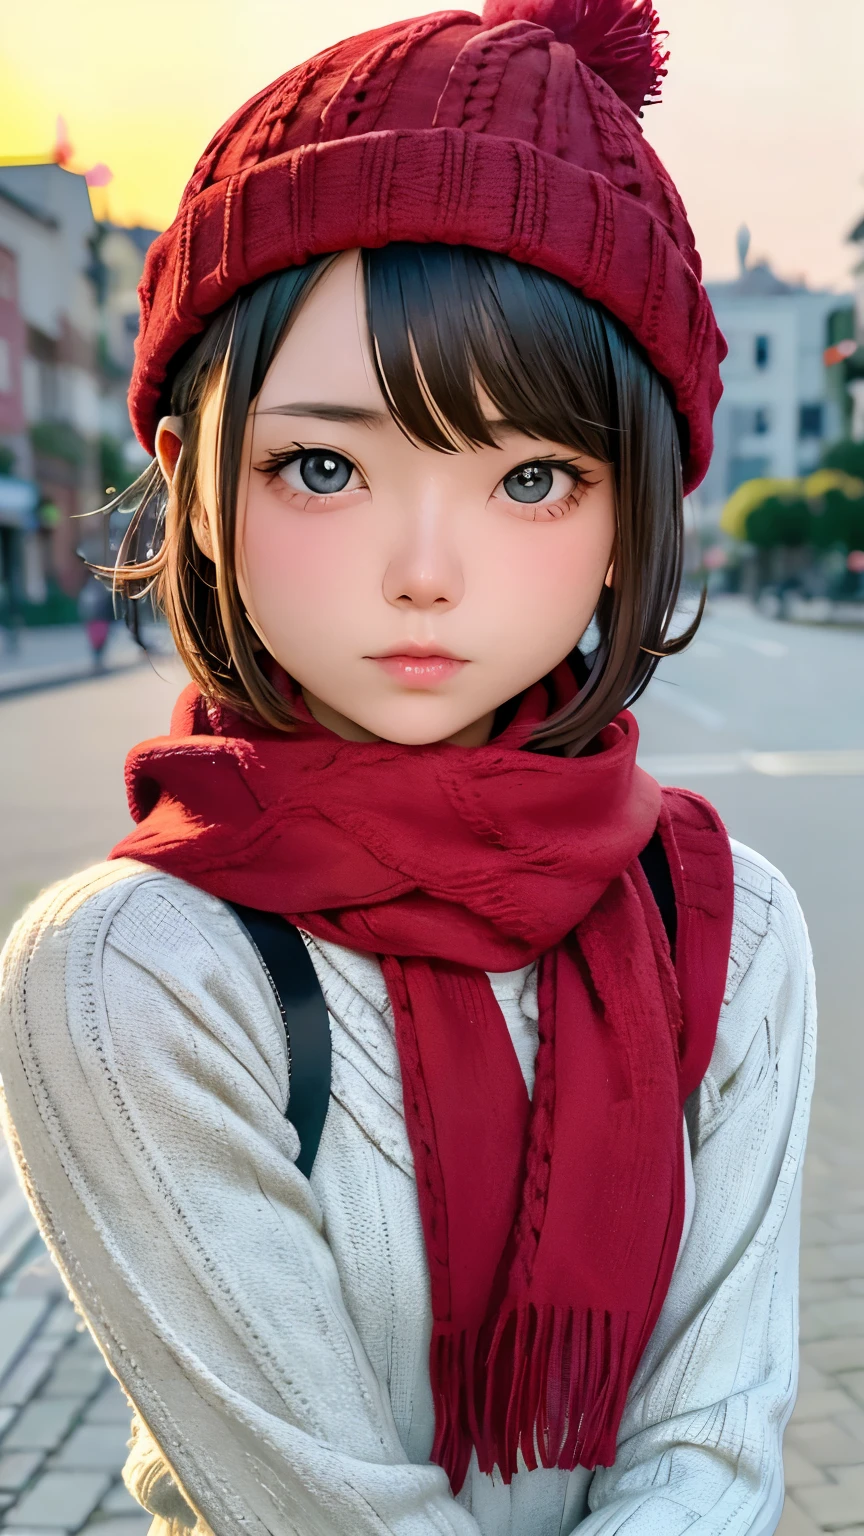 Tabletop:1.2, high quality, 最high quality, High resolution, surreal, With a girl, Short Bob，Dirty hair, Light grey eyes,Infinitely clear eyes，16 years old，High neck inner，Red knitted hat，scarf，Are standing，Tilt your head, sunset, Outdoor，Autumn park:1.5，Blurred Background, Portraiture,Natural look, (detailed face), ((Sharp focus)), ((face)), Upper body_body